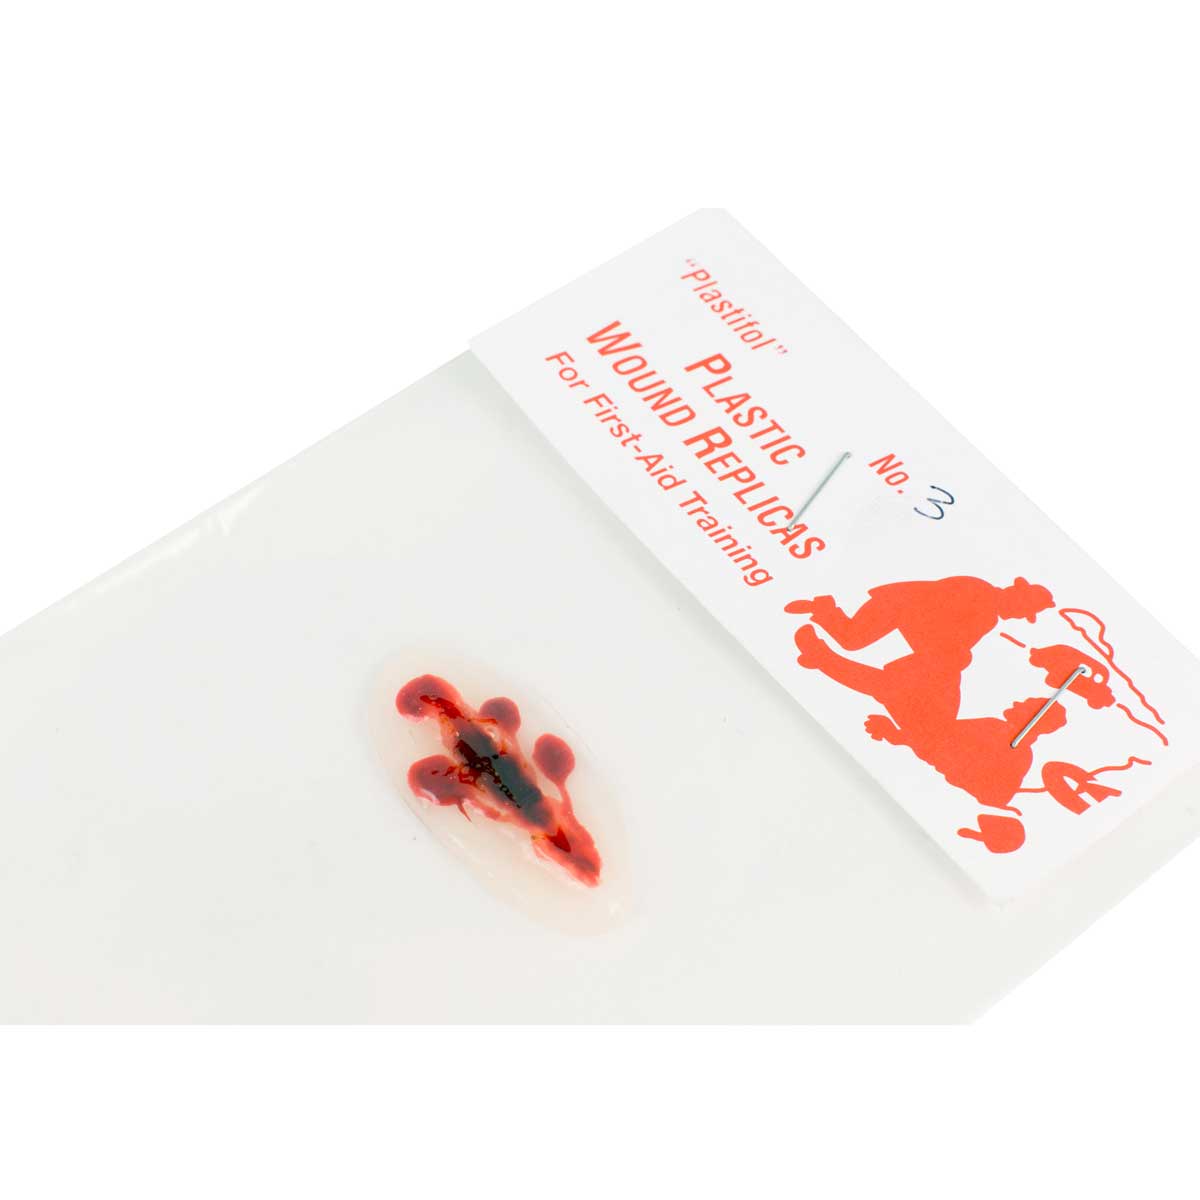 3.8cm Lacerated Replica Wound in packaging